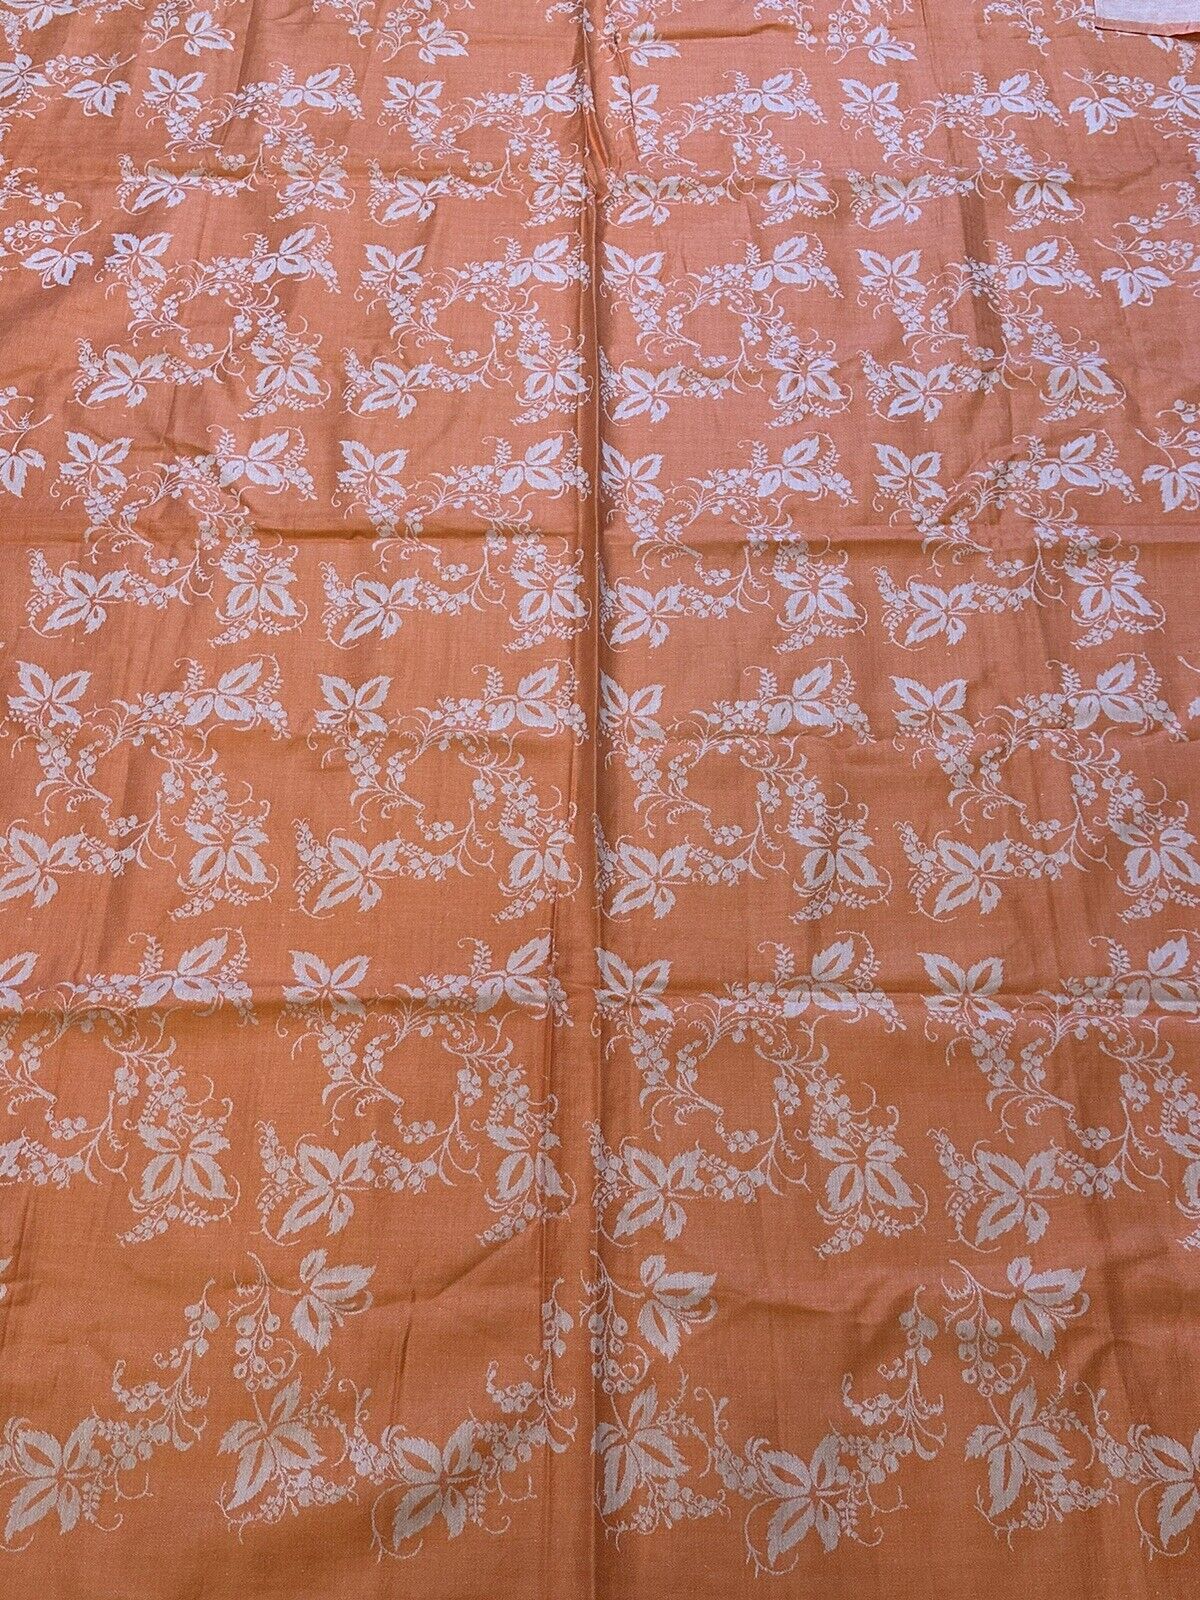 Vintage 70\'s Rich Damask Floral Tablecloth NWT